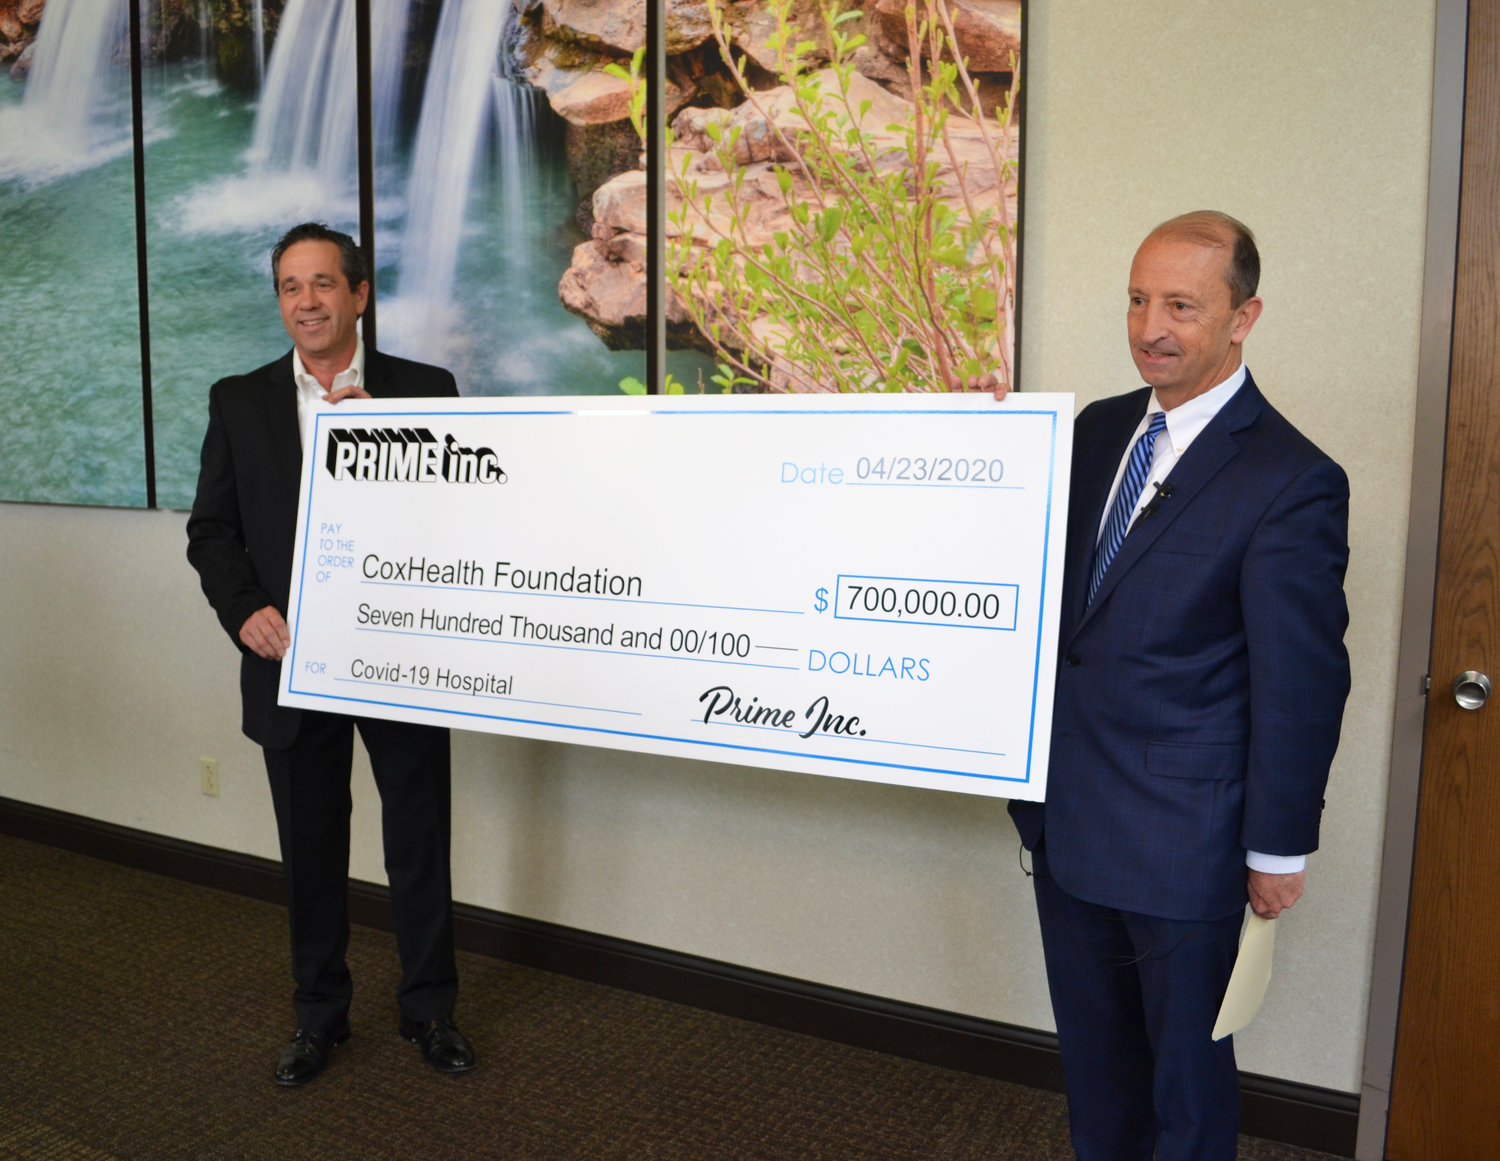 Darrel Hopkins, director of leasing and controller at Prime, left, presents a check to CoxHealth President and CEO Steve Edwards.